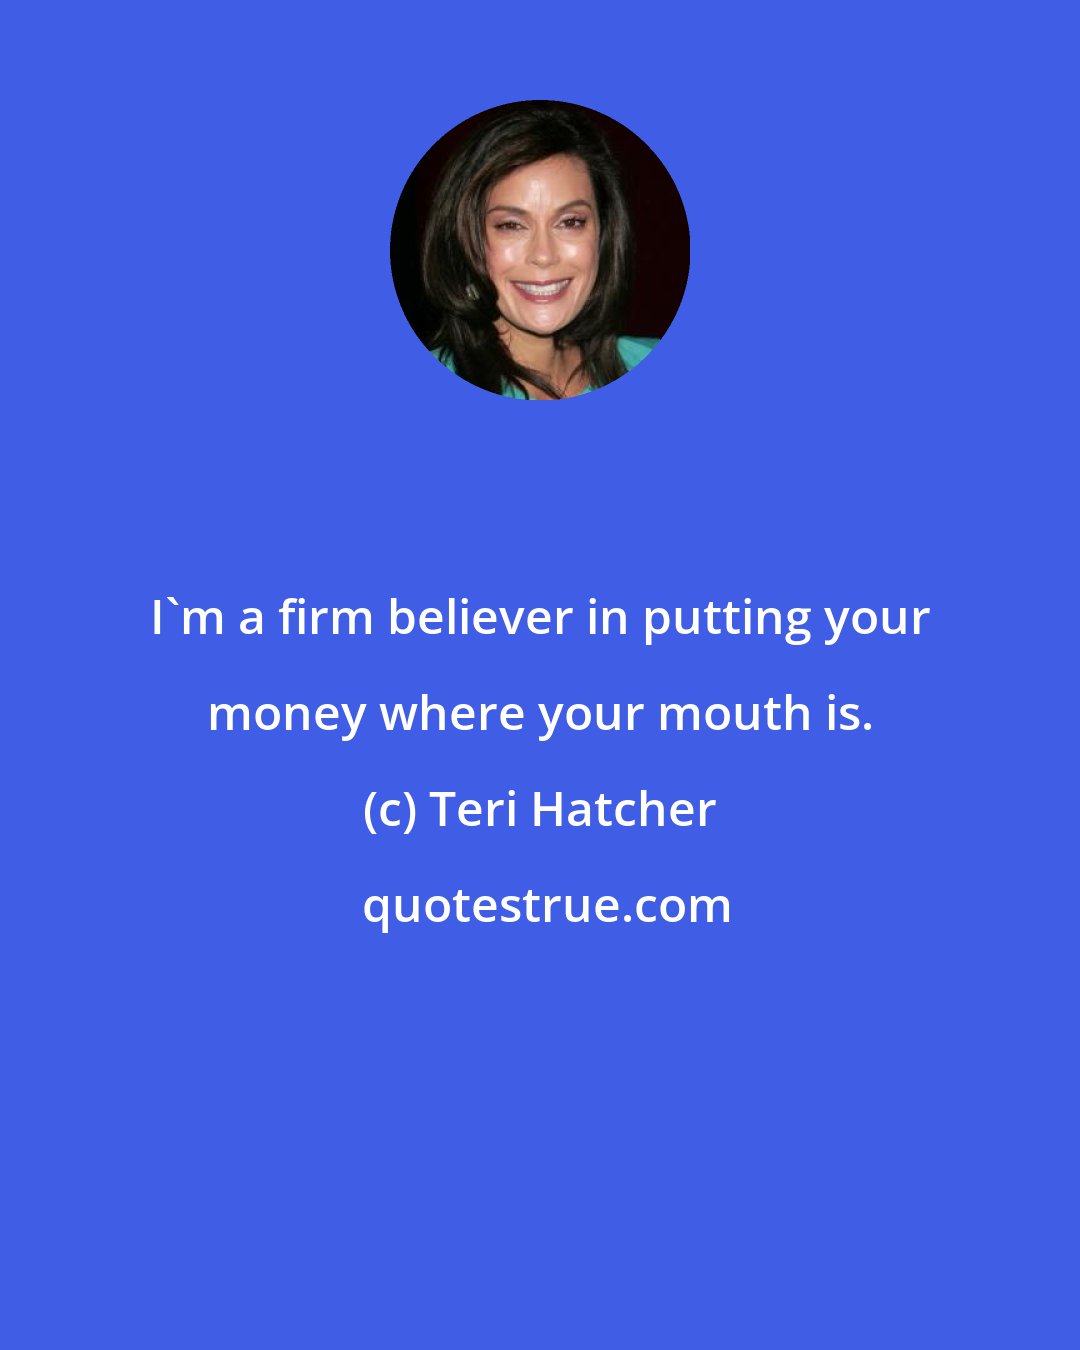 Teri Hatcher: I'm a firm believer in putting your money where your mouth is.